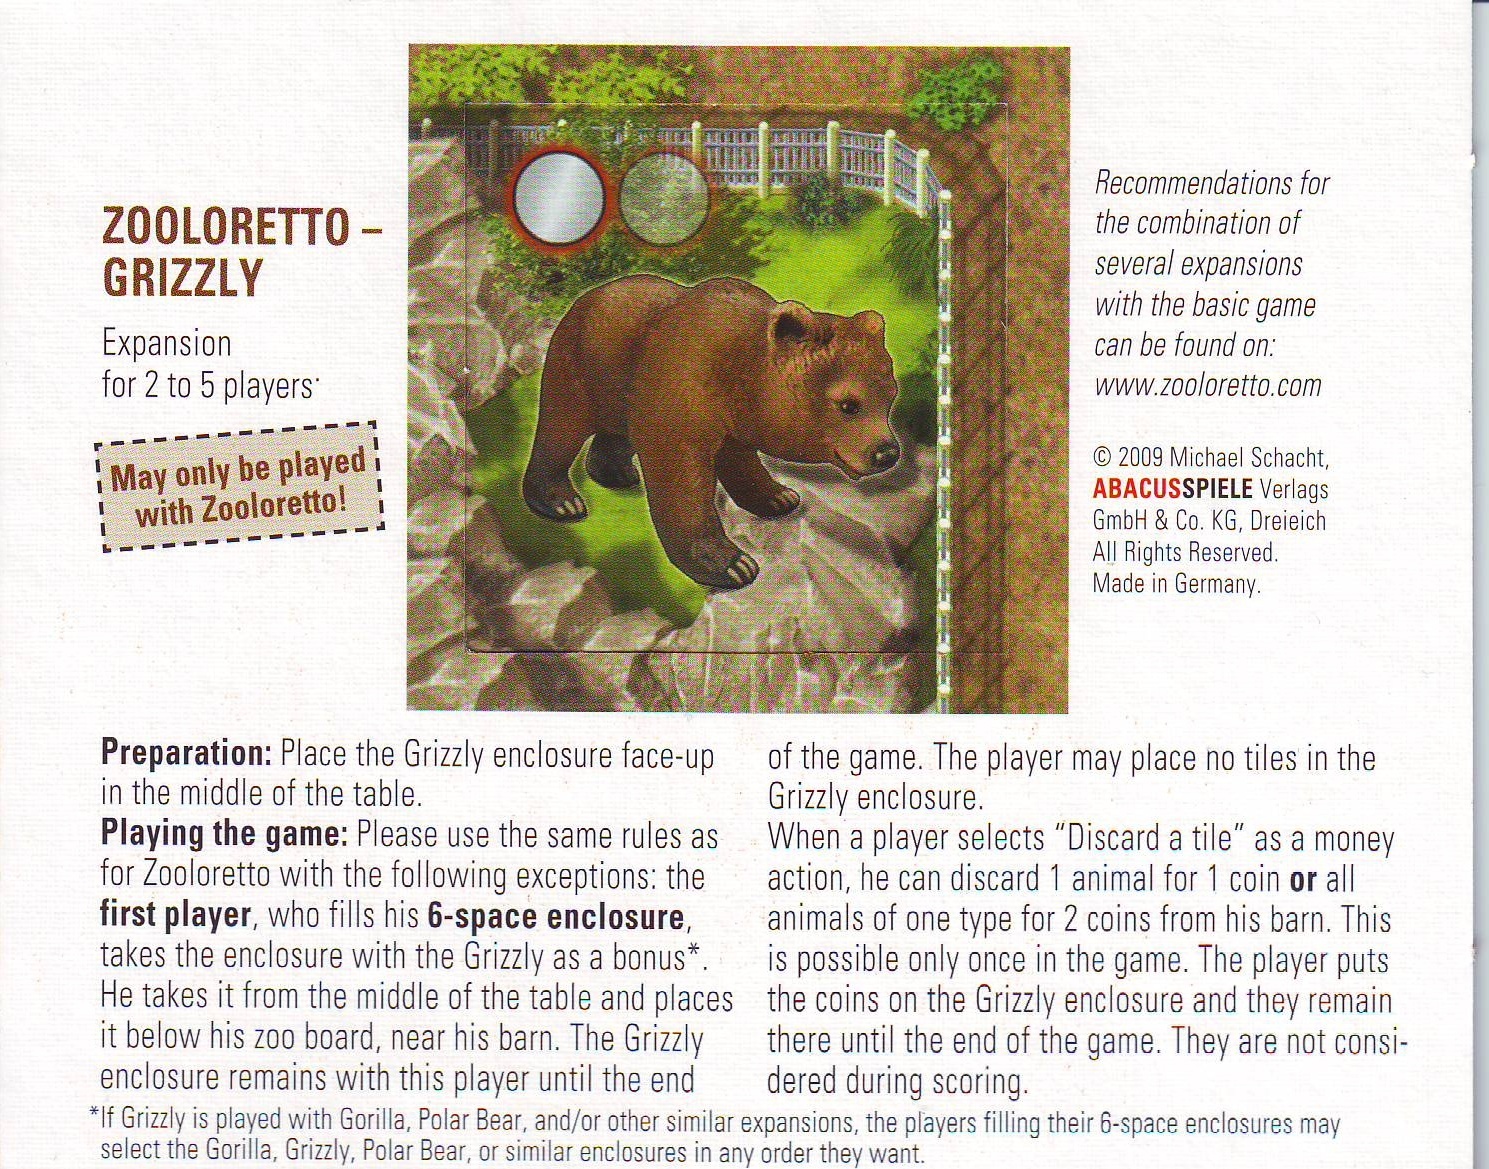 Zooloretto: Grizzly